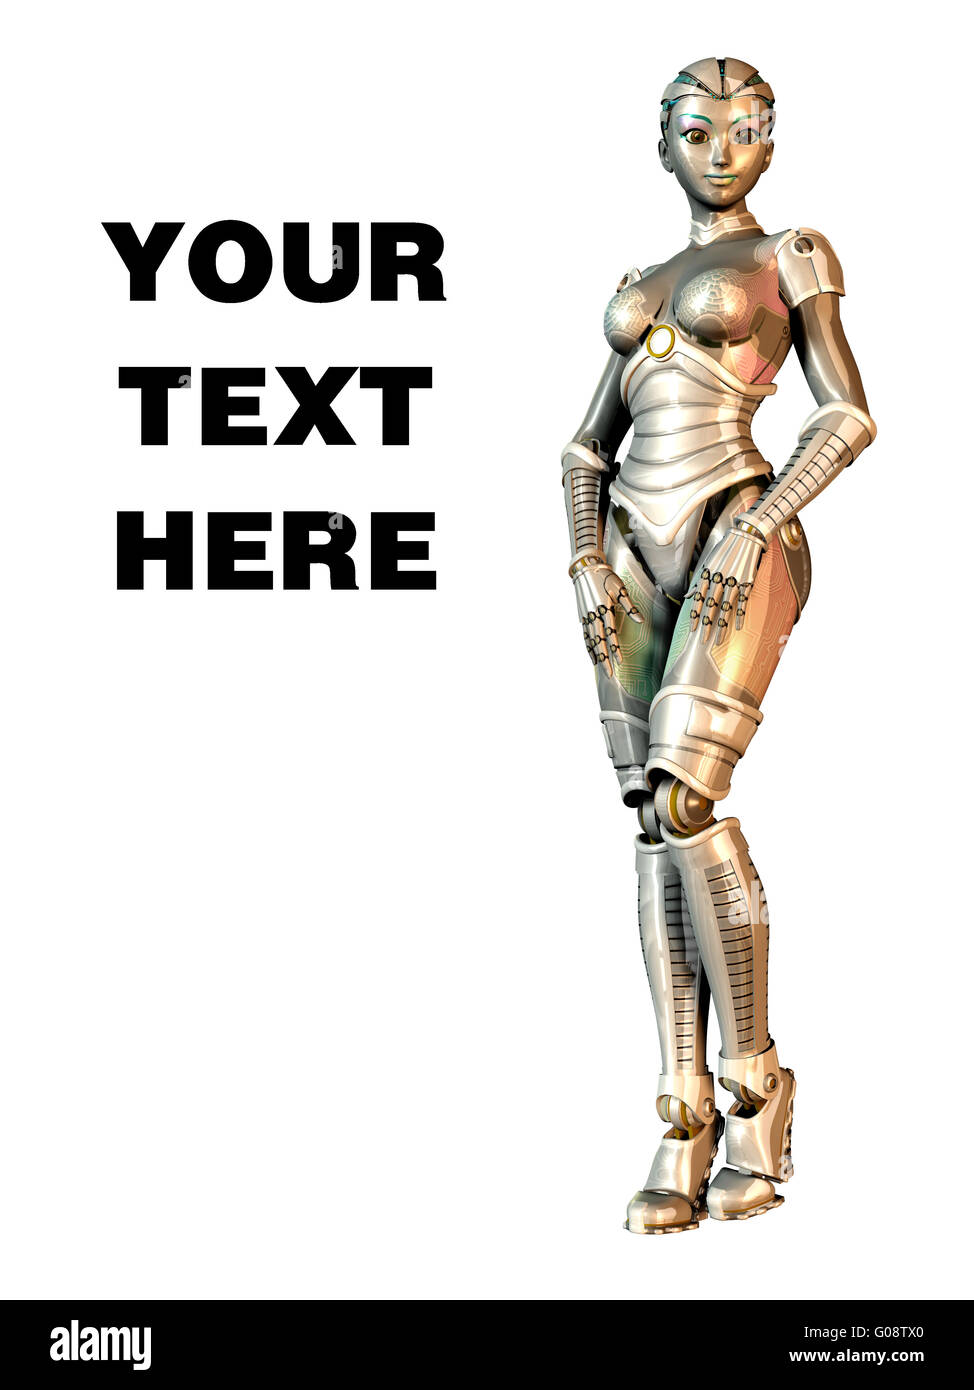 Female Robot with Empty Space Stock Photo